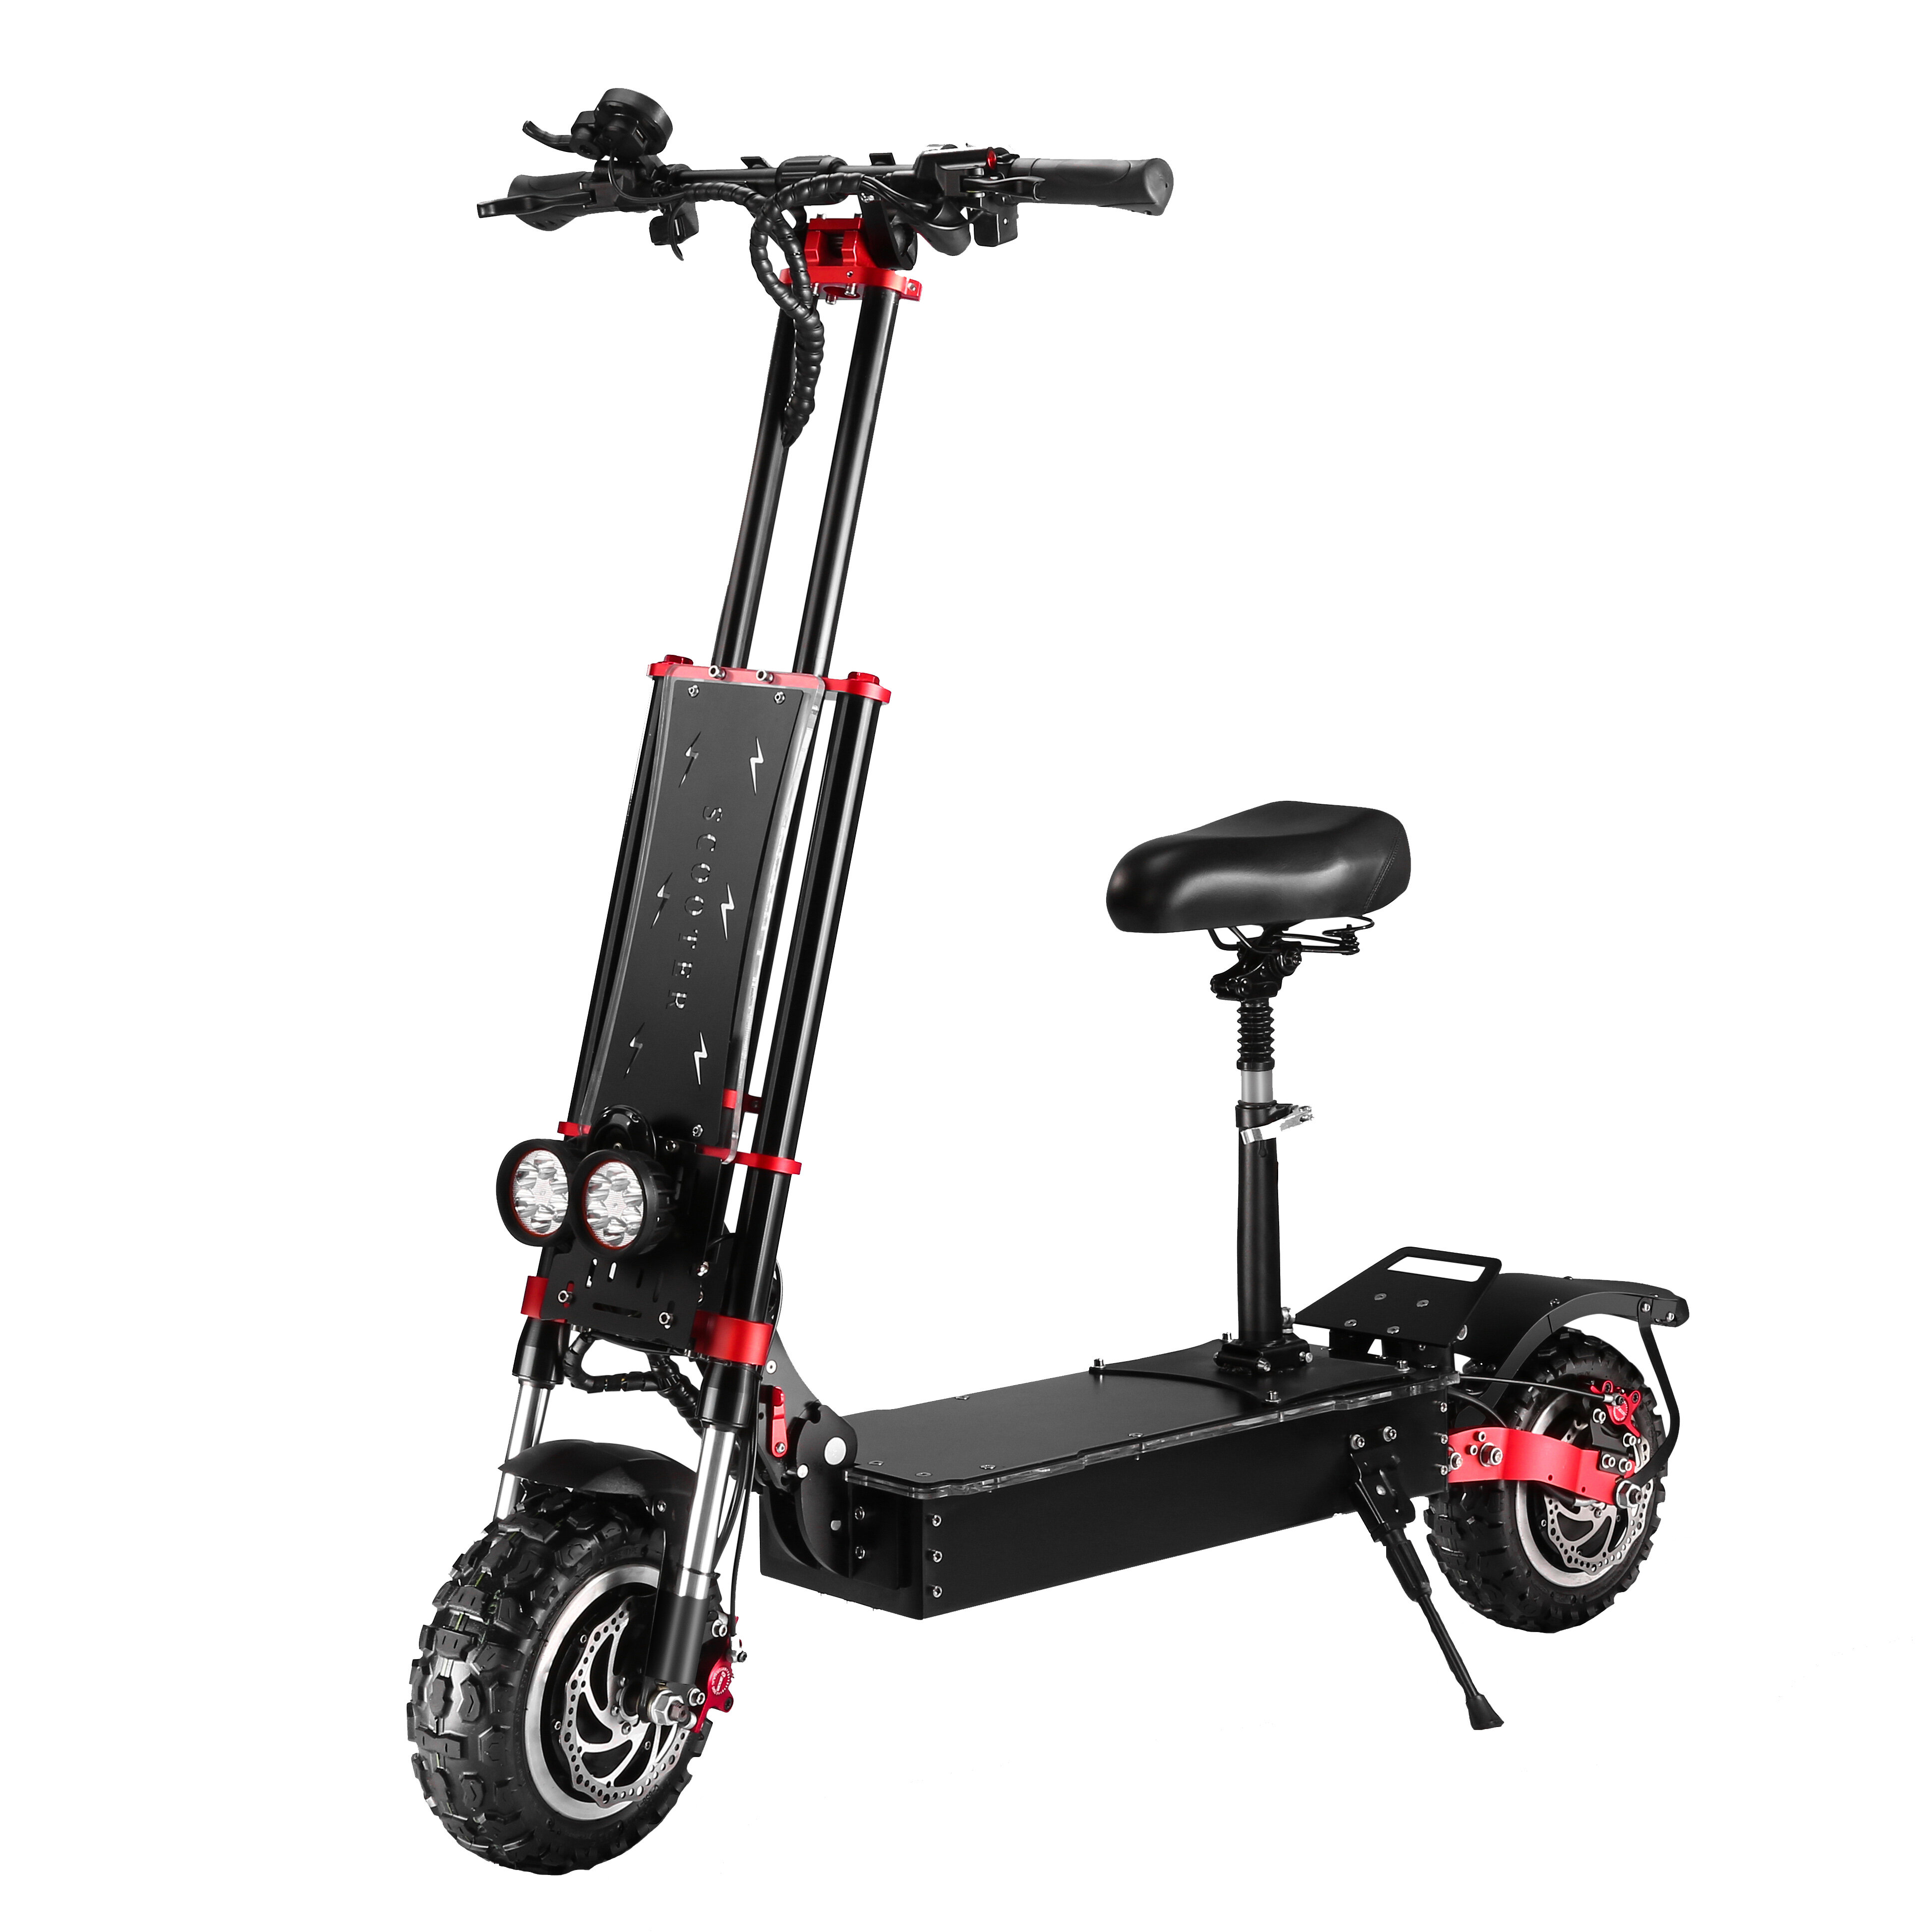 best price,boyueda,s4,38ah,5600w,60v,oil,brake,inch,electric,scooter,discount